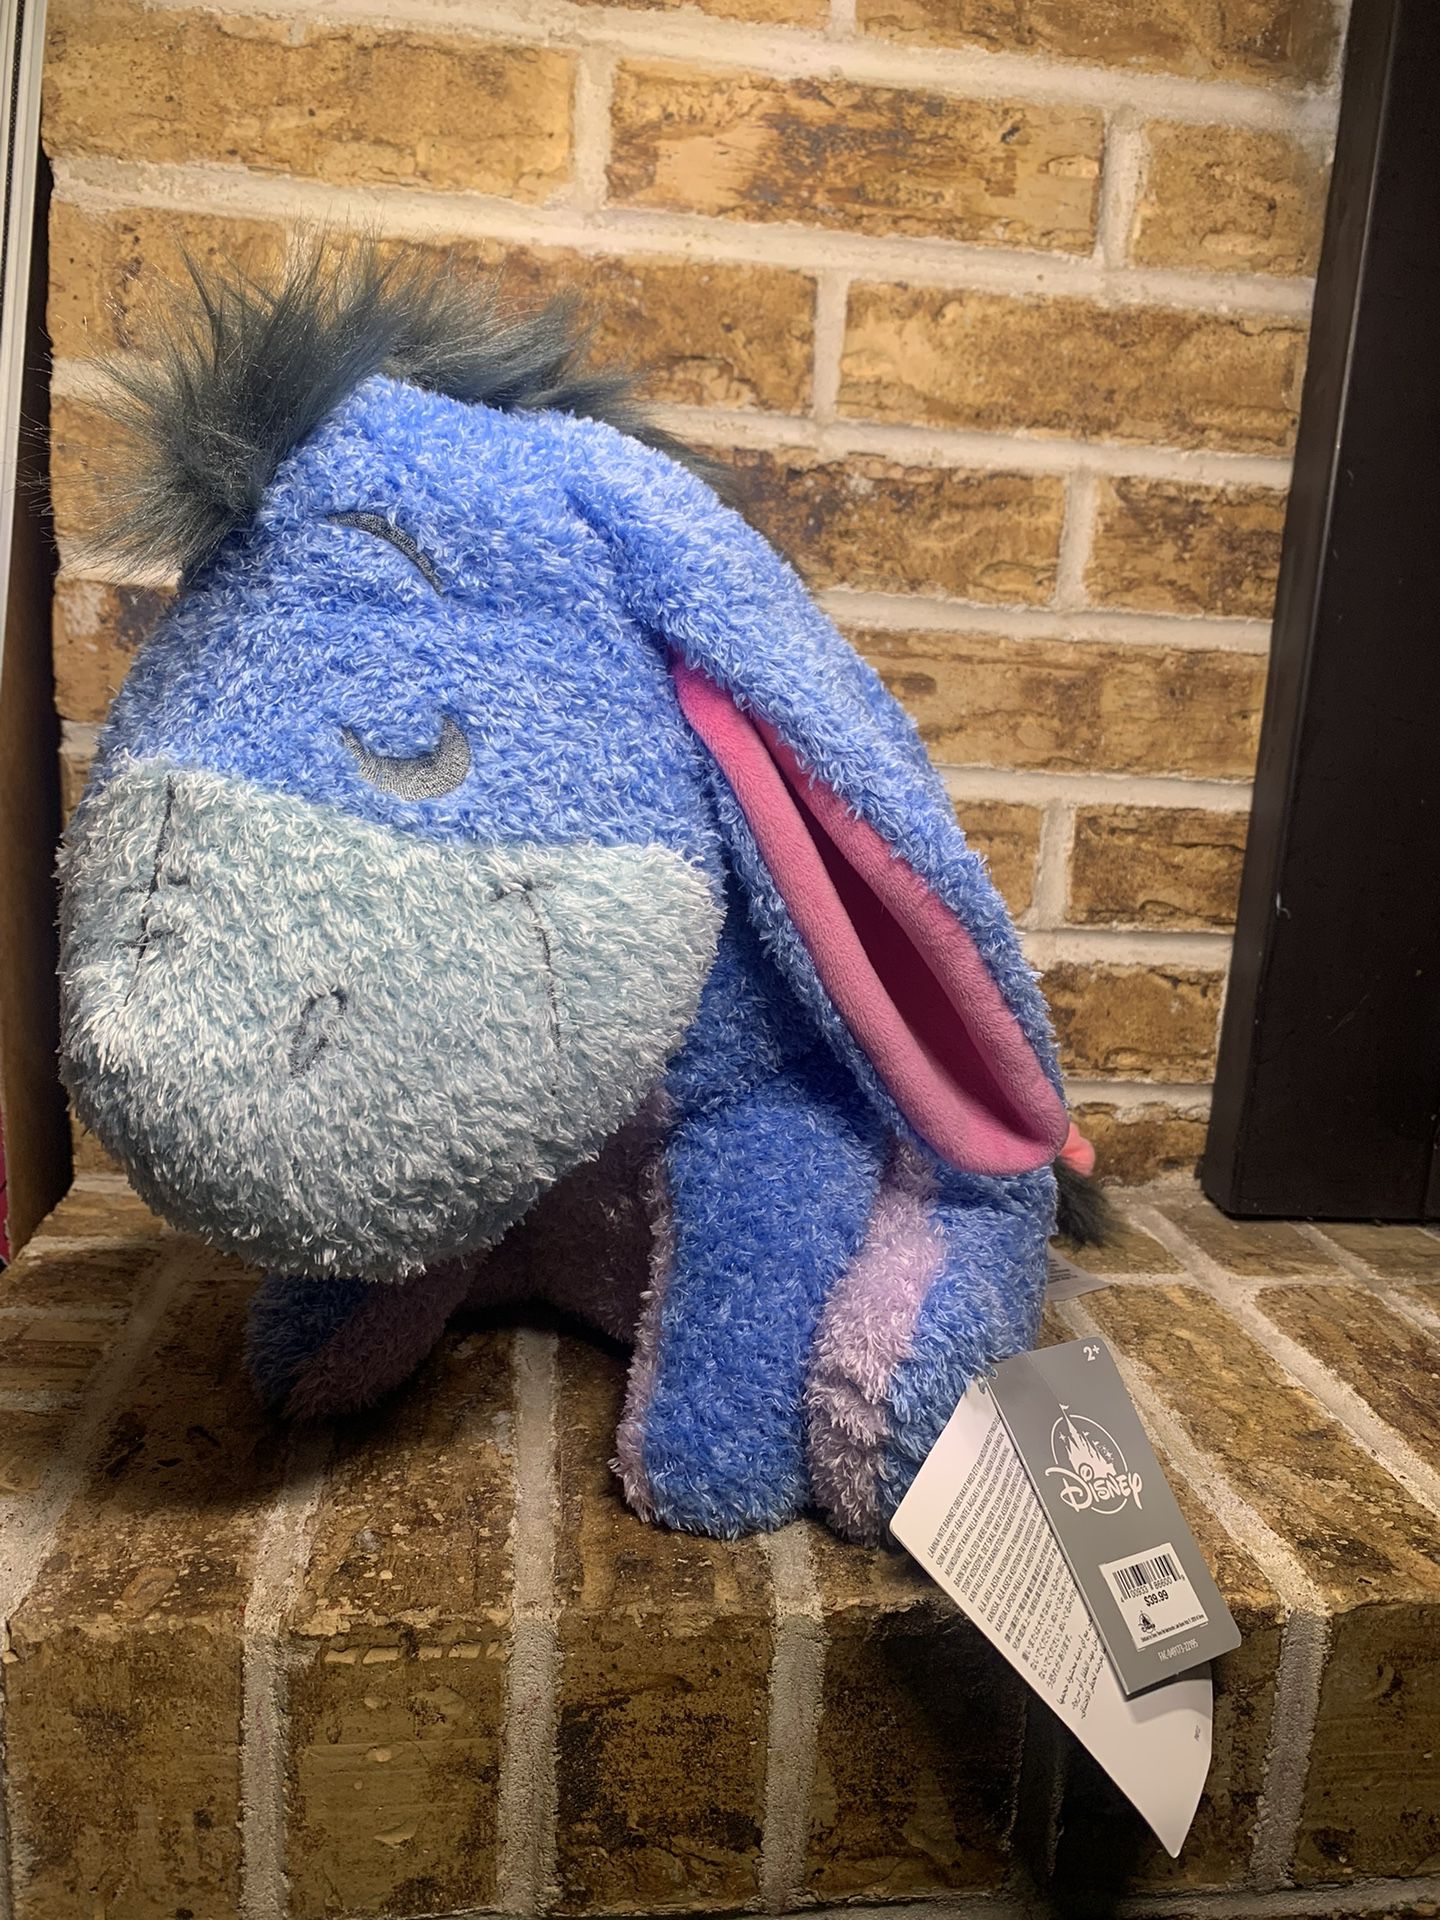 Disney  Eeyore Plush 14" Pouch Pooh Friends NWT Weighted Pouch Not Included